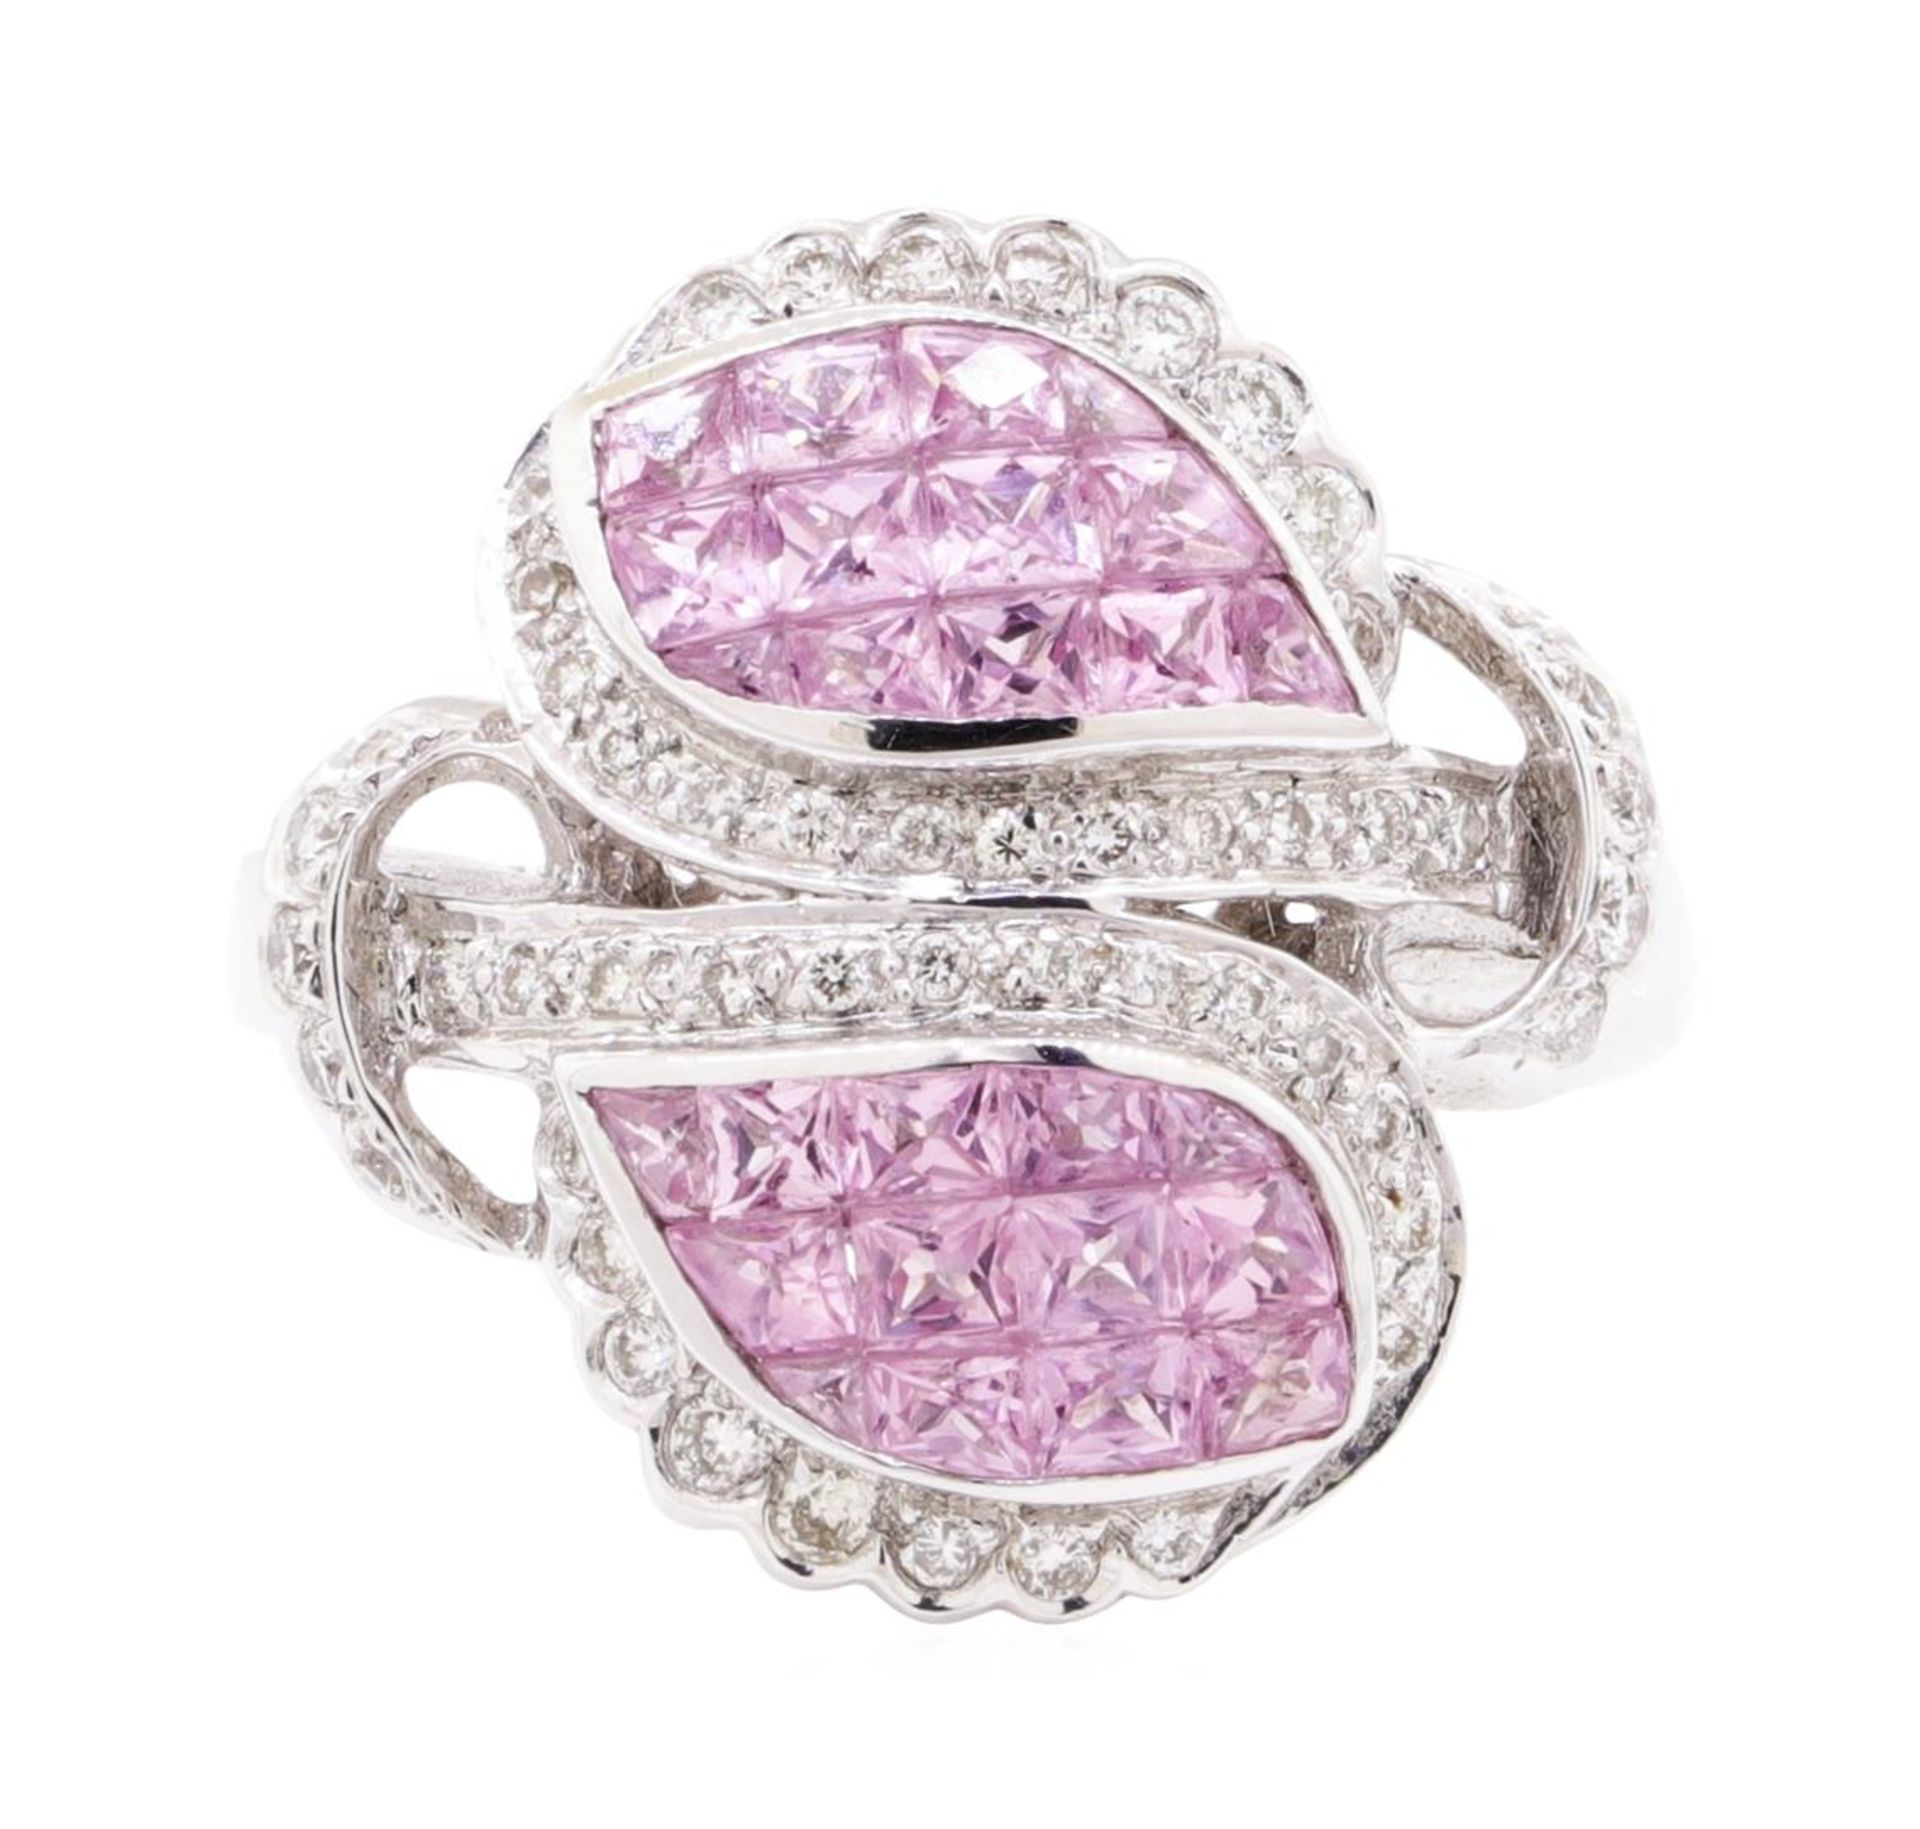 2.40 ctw Pink Sapphire And Diamond Ring - 18KT White Gold - Image 2 of 5